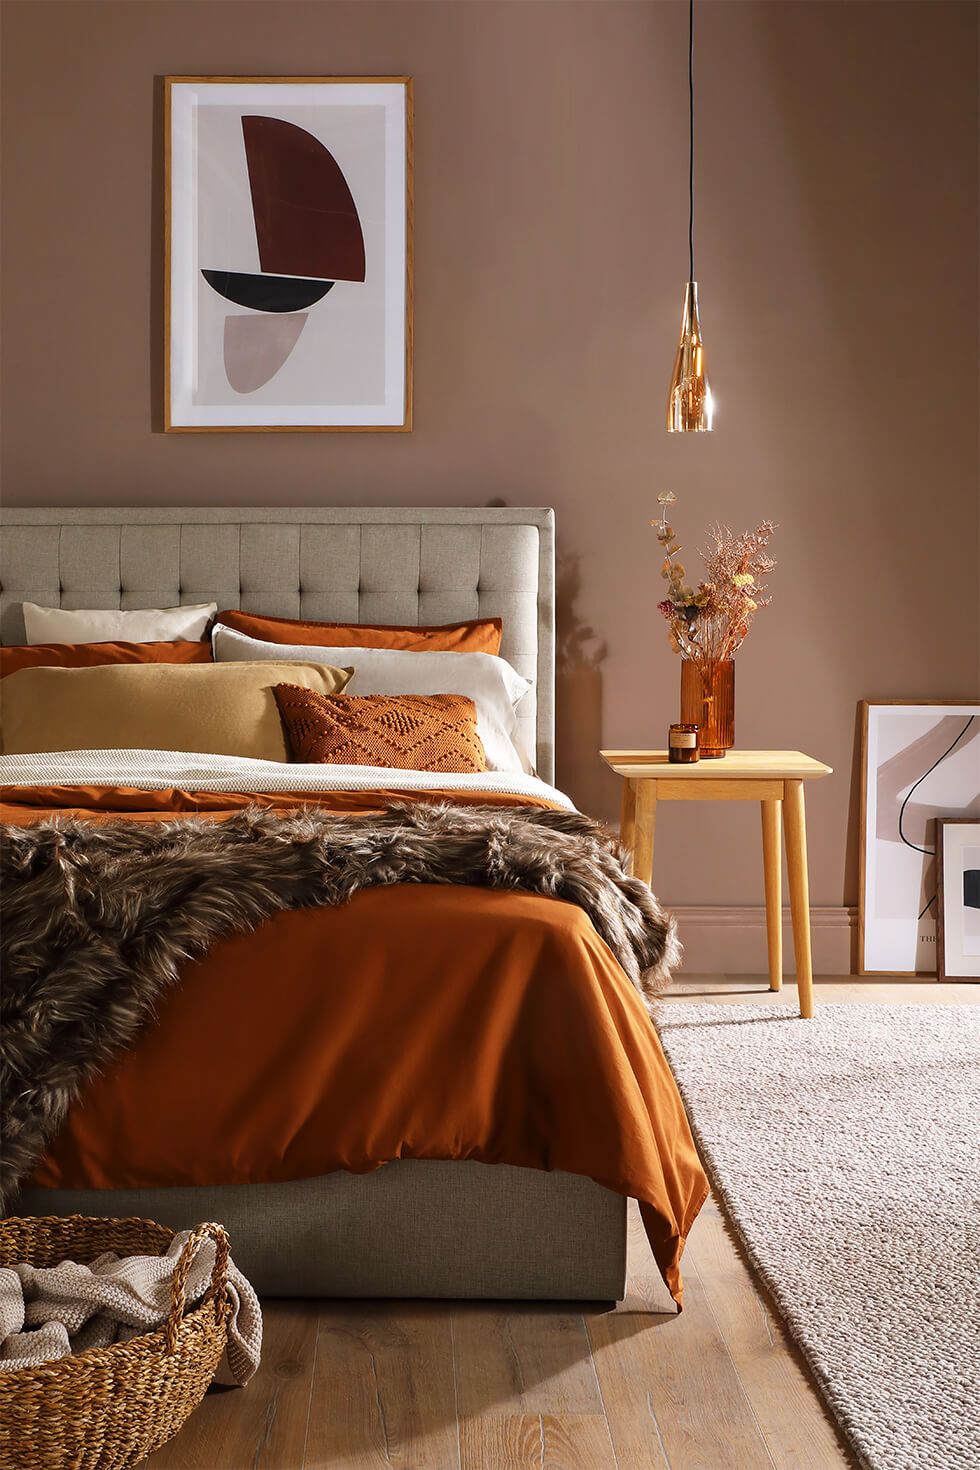 A warm bedroom styled with a tufted bed, layers of cosy linens and an abstract wall art